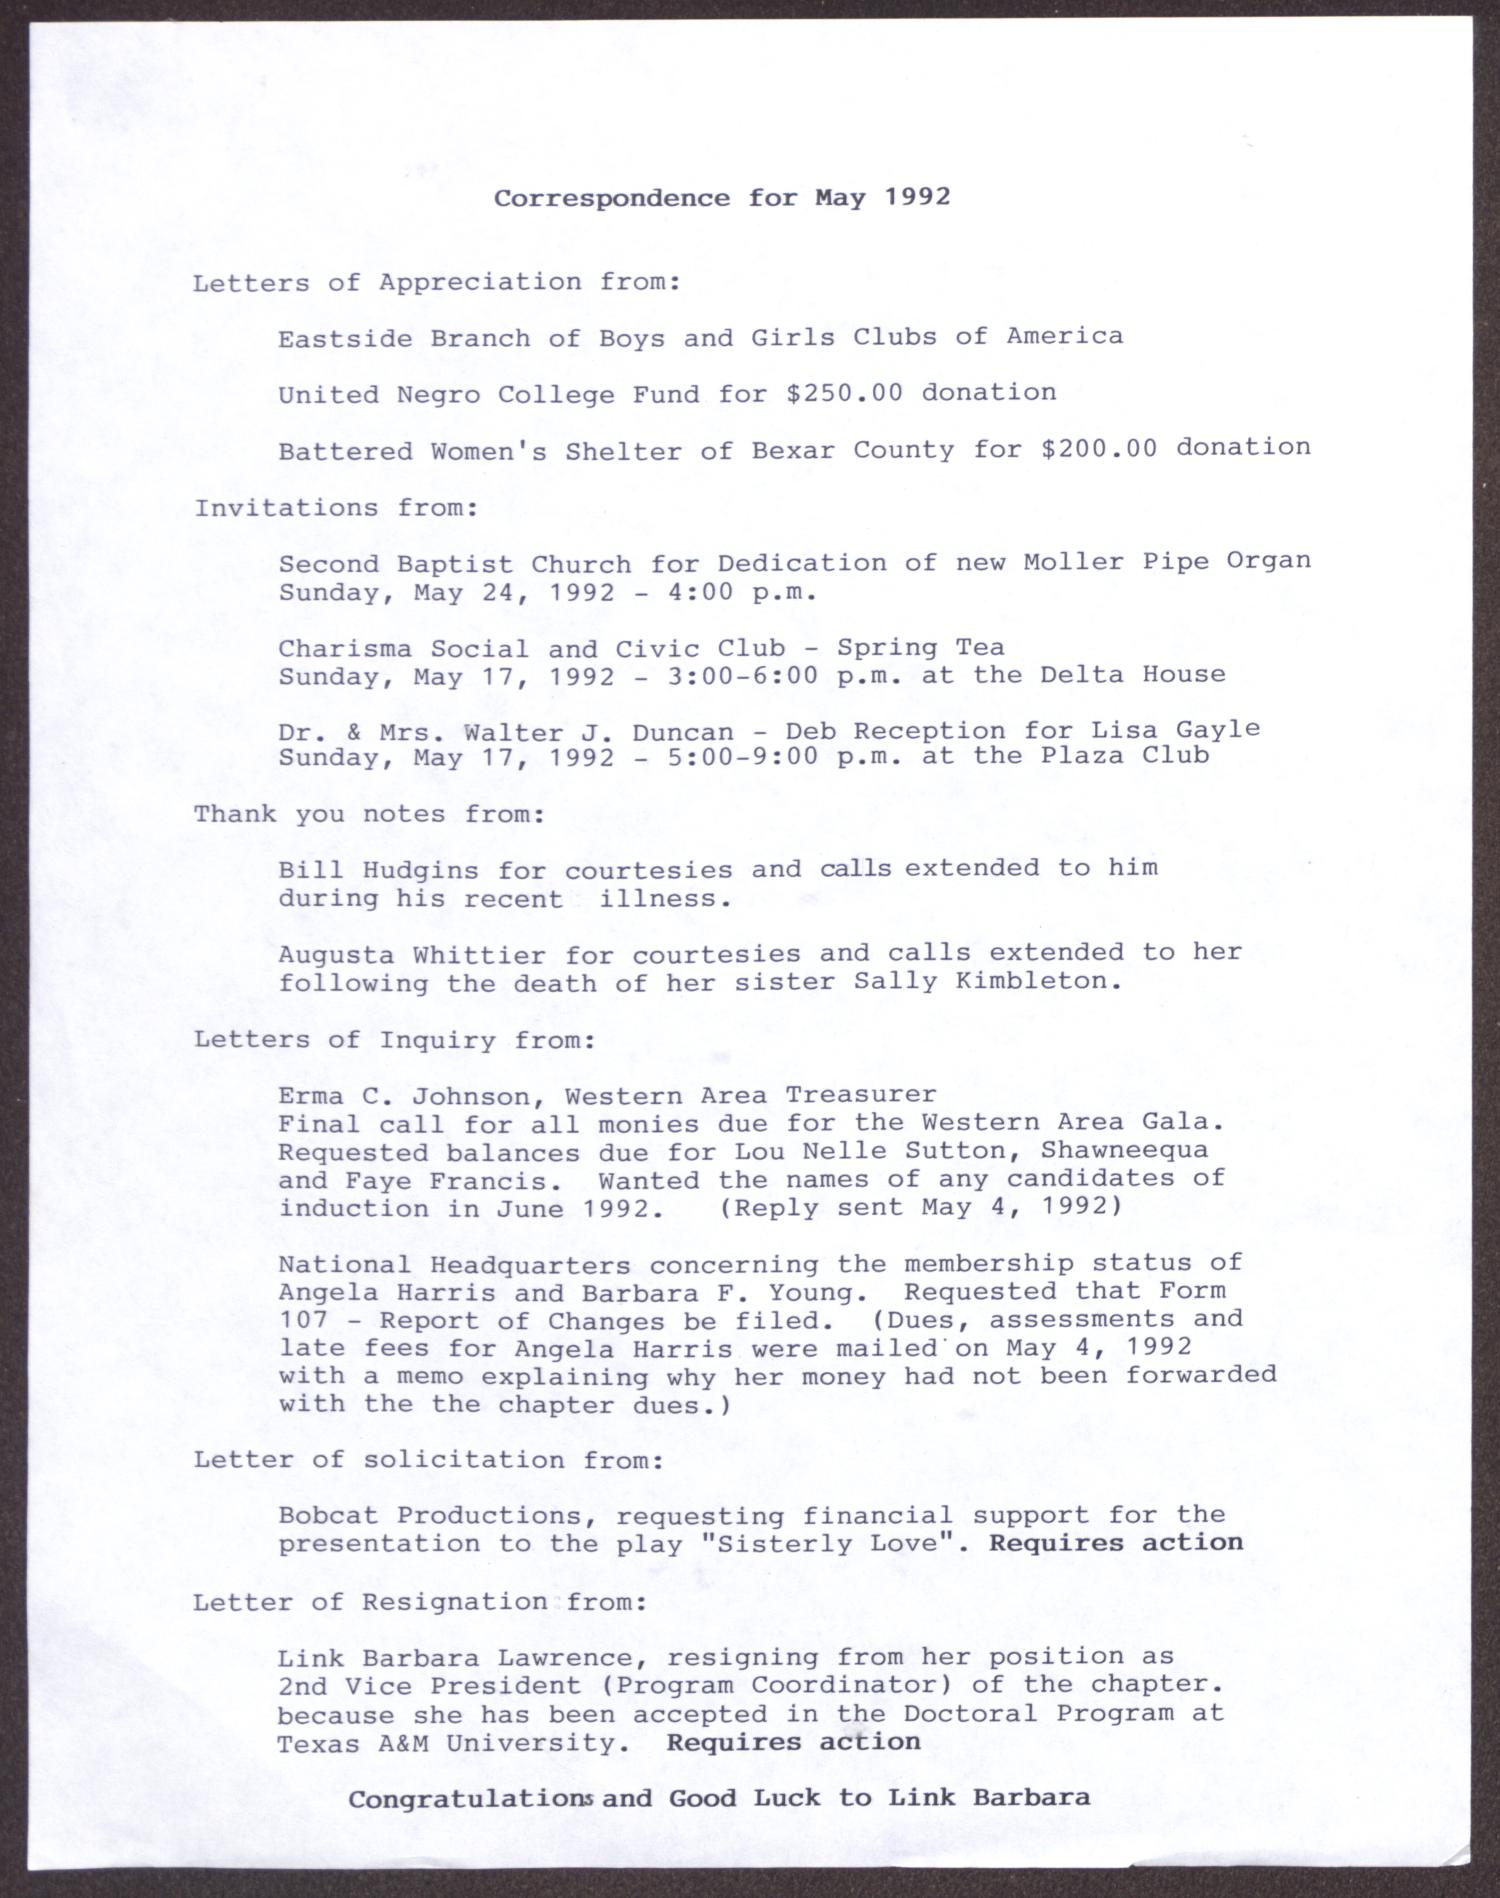 [Agenda for the San Antonio Chapter of the Links, Inc. Meeting - May 17, 1992]
                                                
                                                    [Sequence #]: 3 of 6
                                                